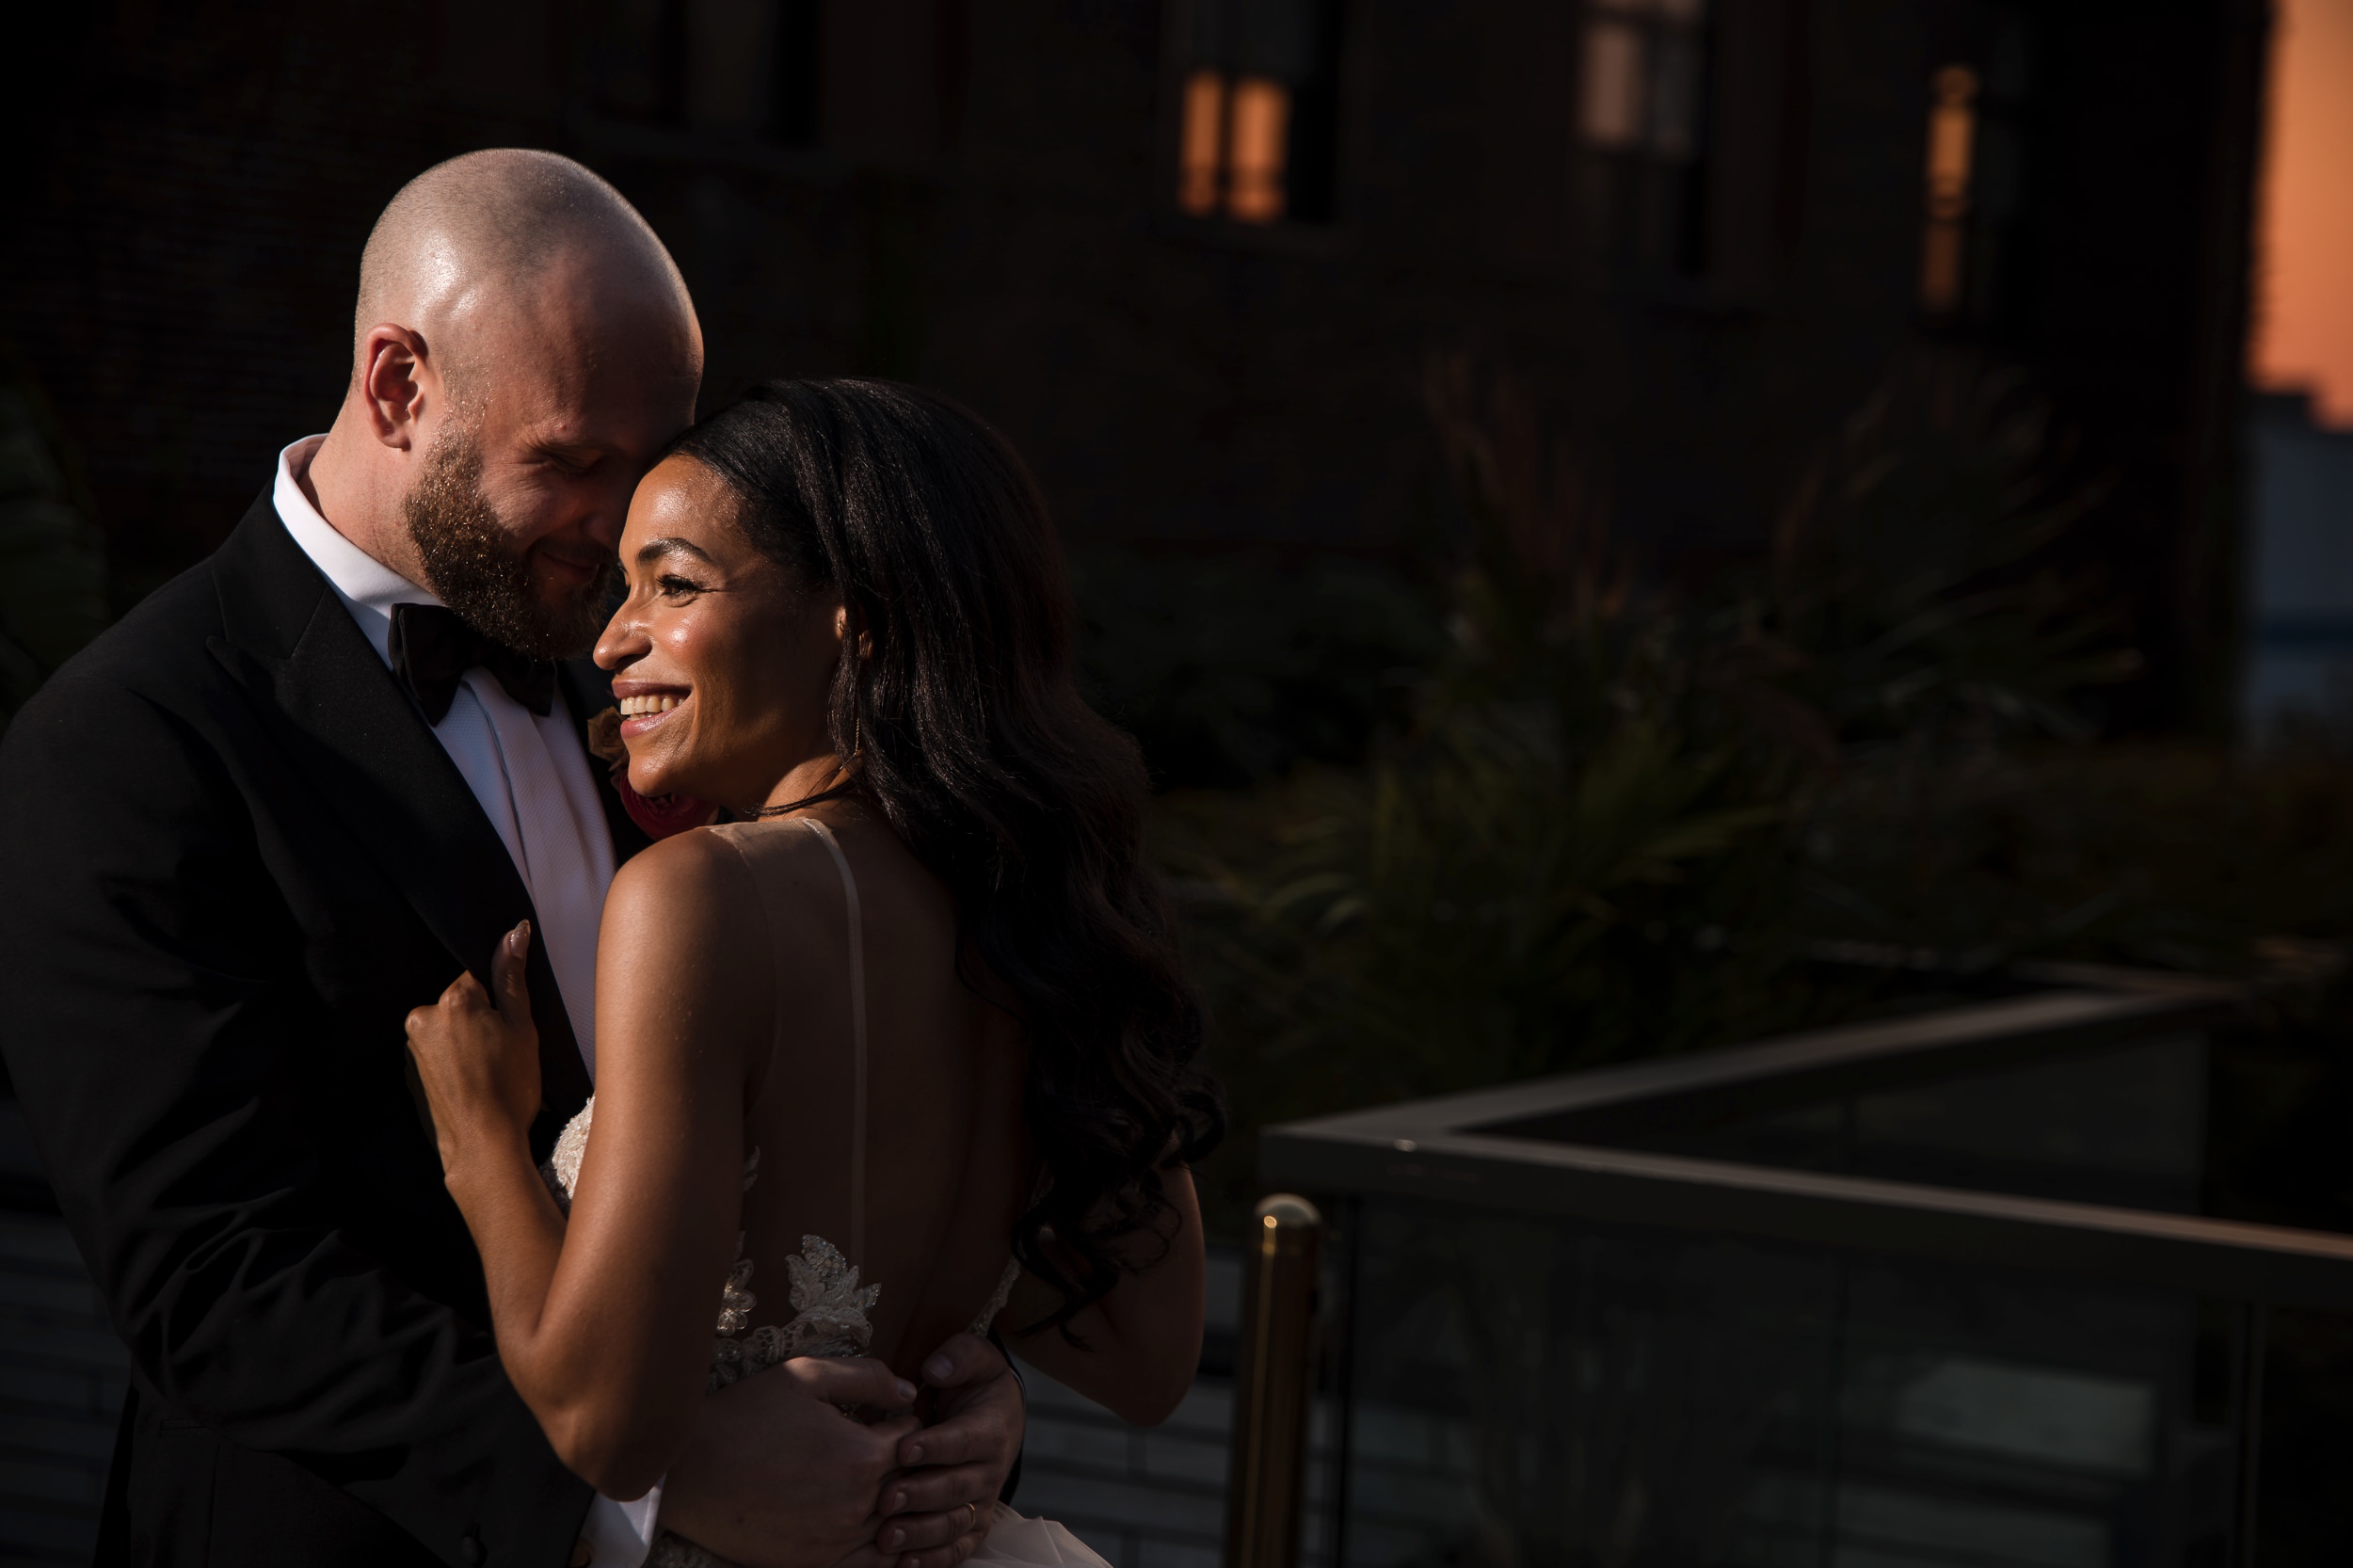 Sunset portraits at a wedding at 74 Wythe.